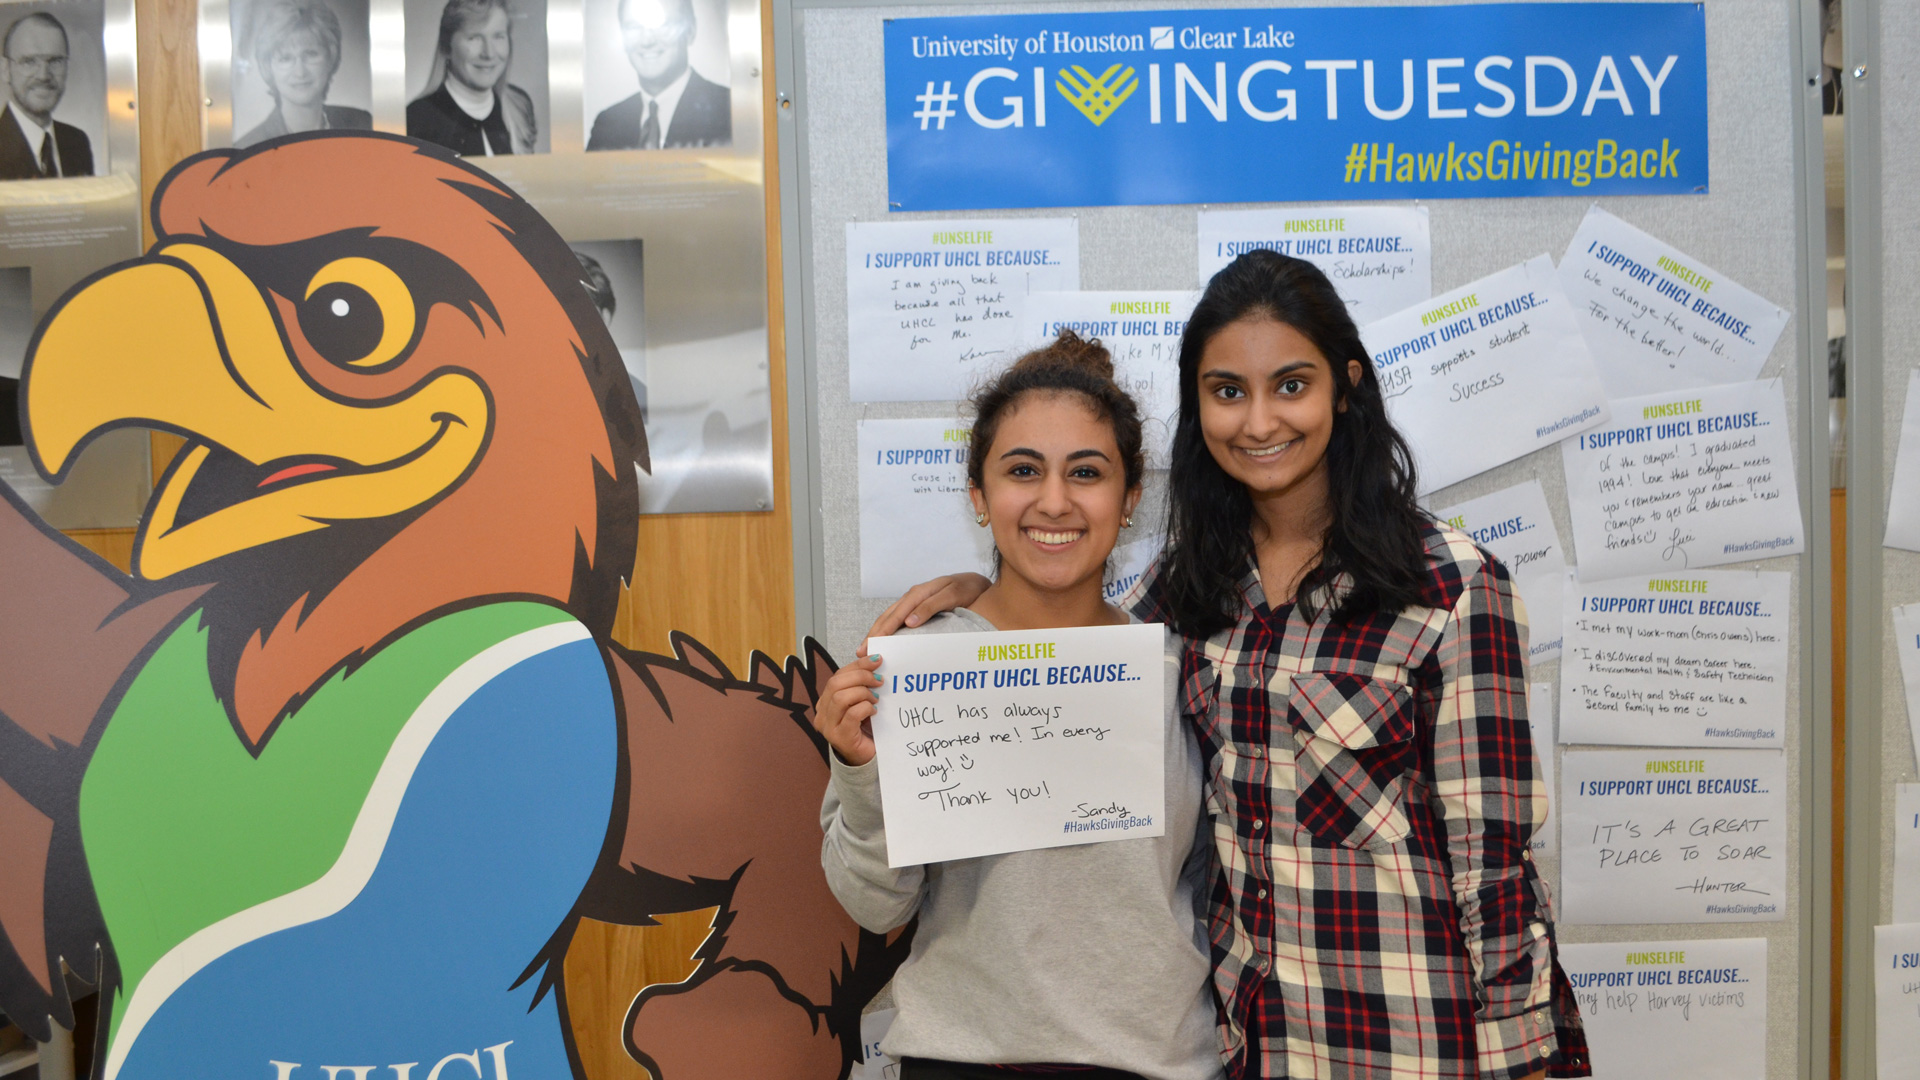 PHOTO: UHCL Giving Tuesday. Photo Courtesy of UHCL Marketing and Communications.